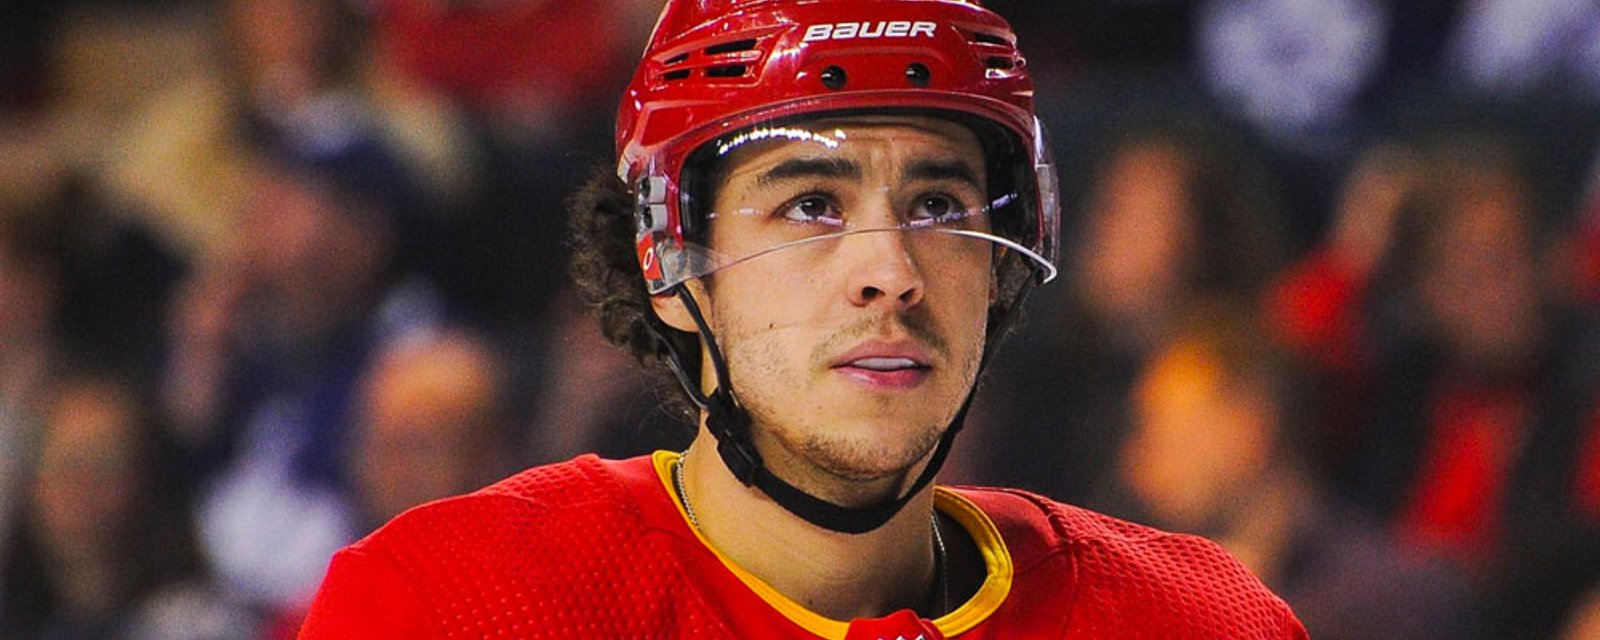 Asking price for Flames’ Gaudreau finally revealed! 